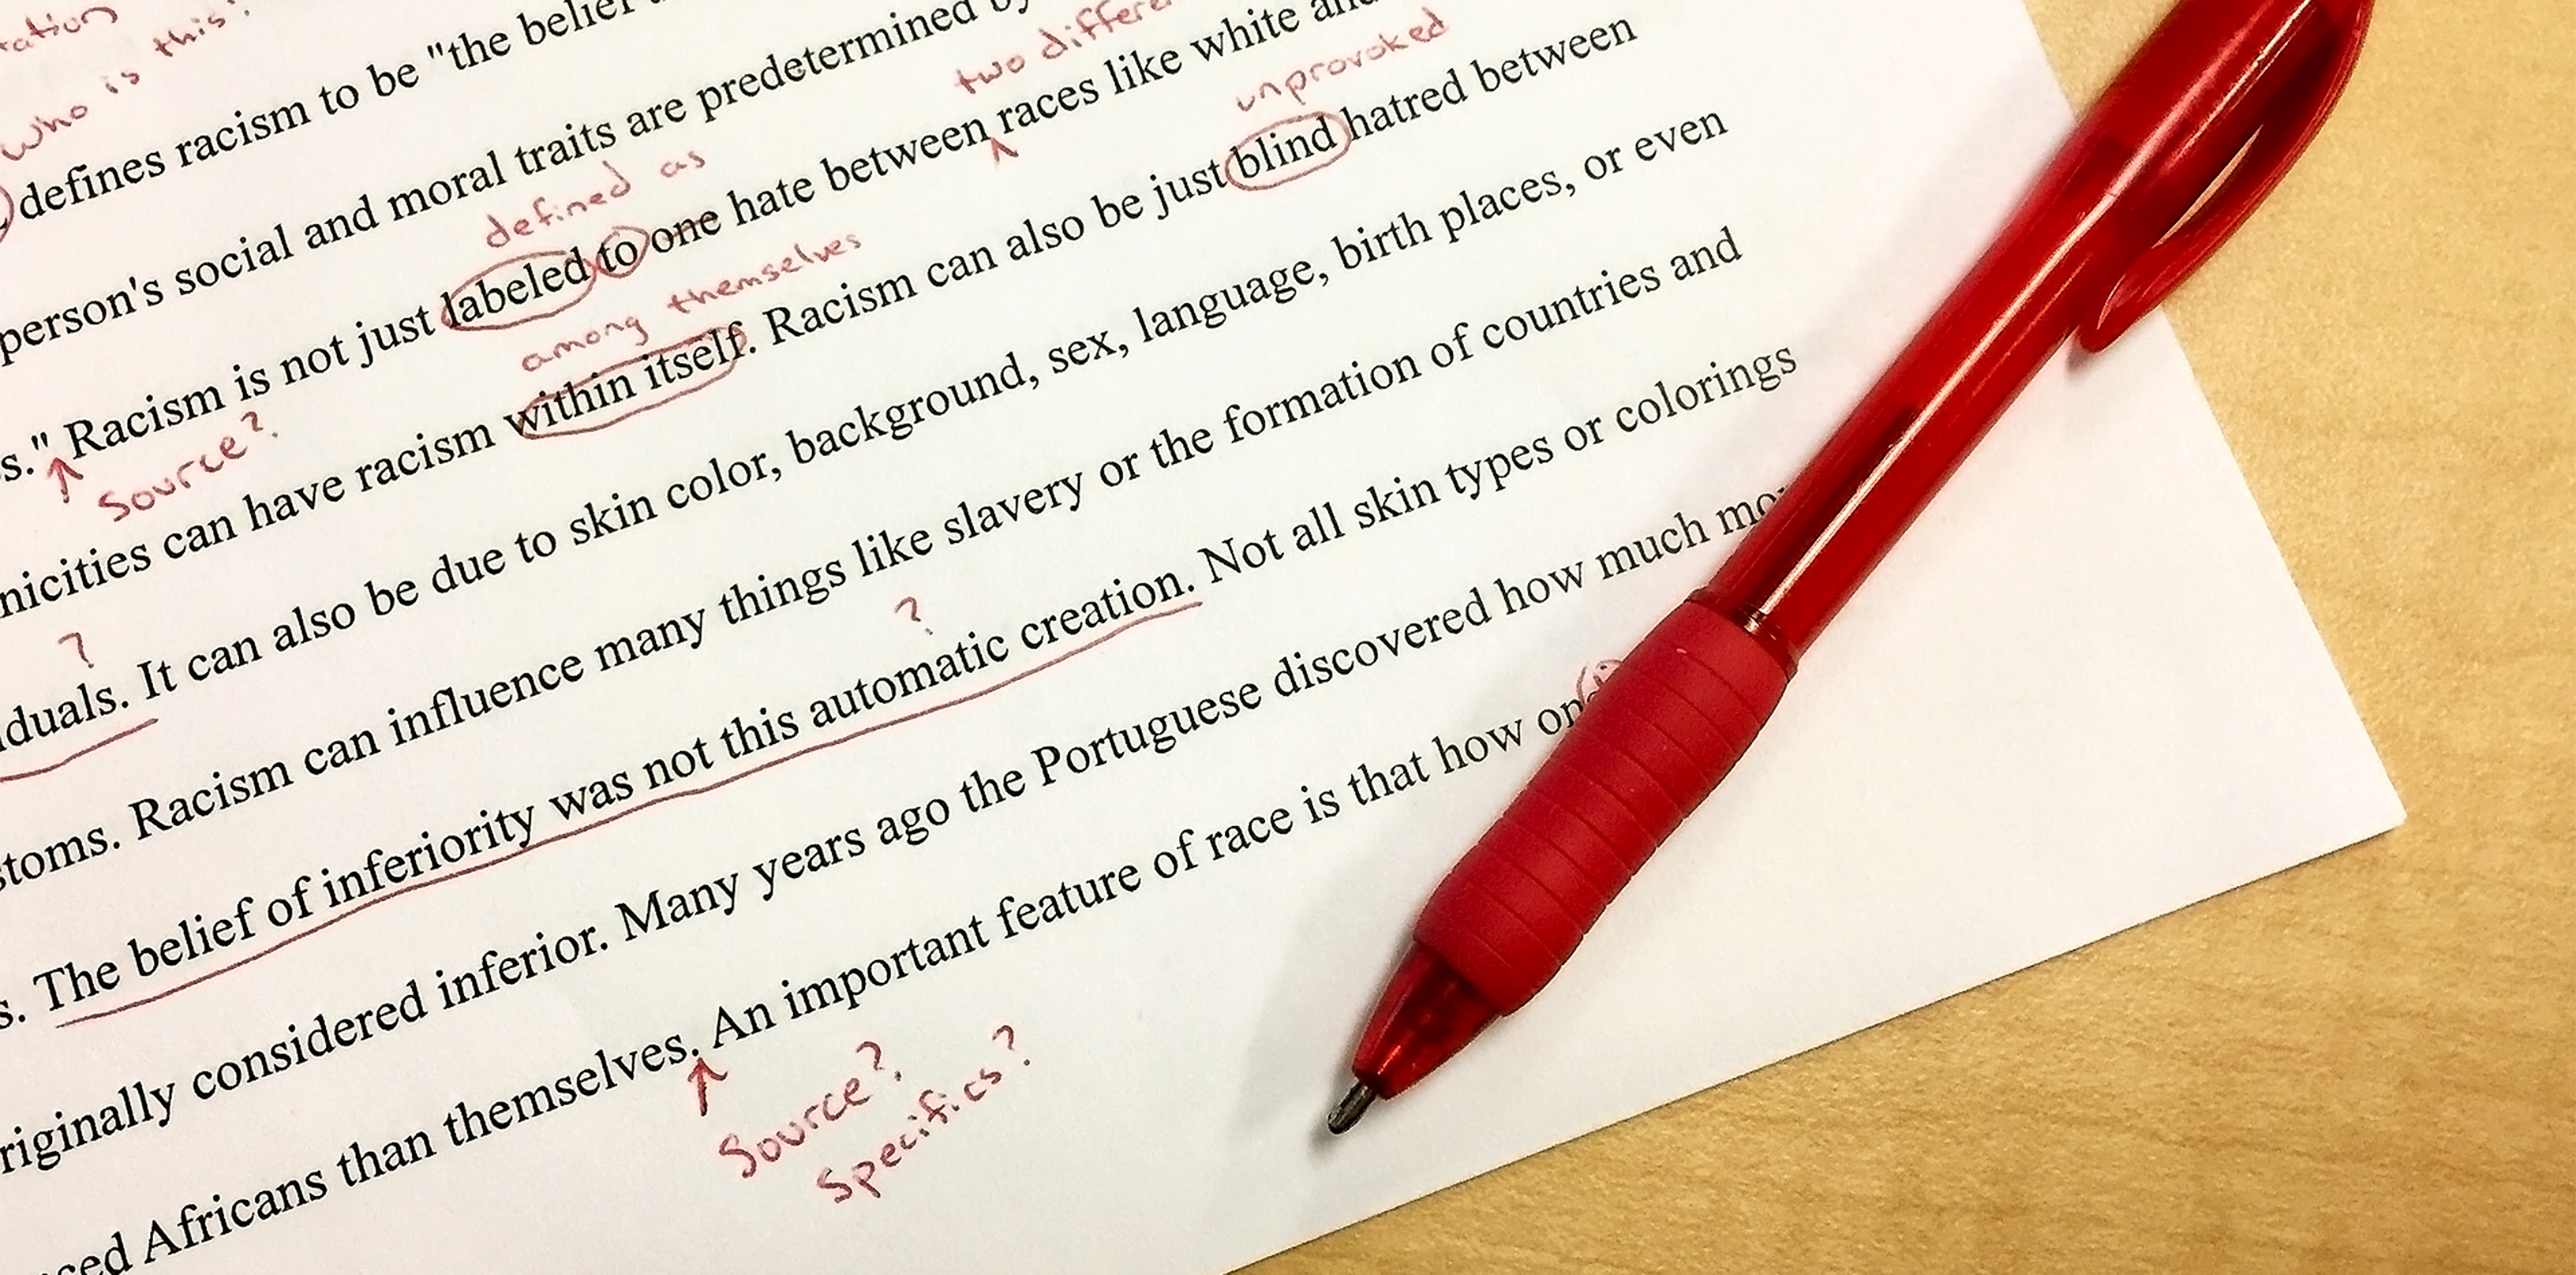 feedback in grad school. essay with a red pen resting on the page. comments and marks cover the paper, image by annekarakash on pixabay